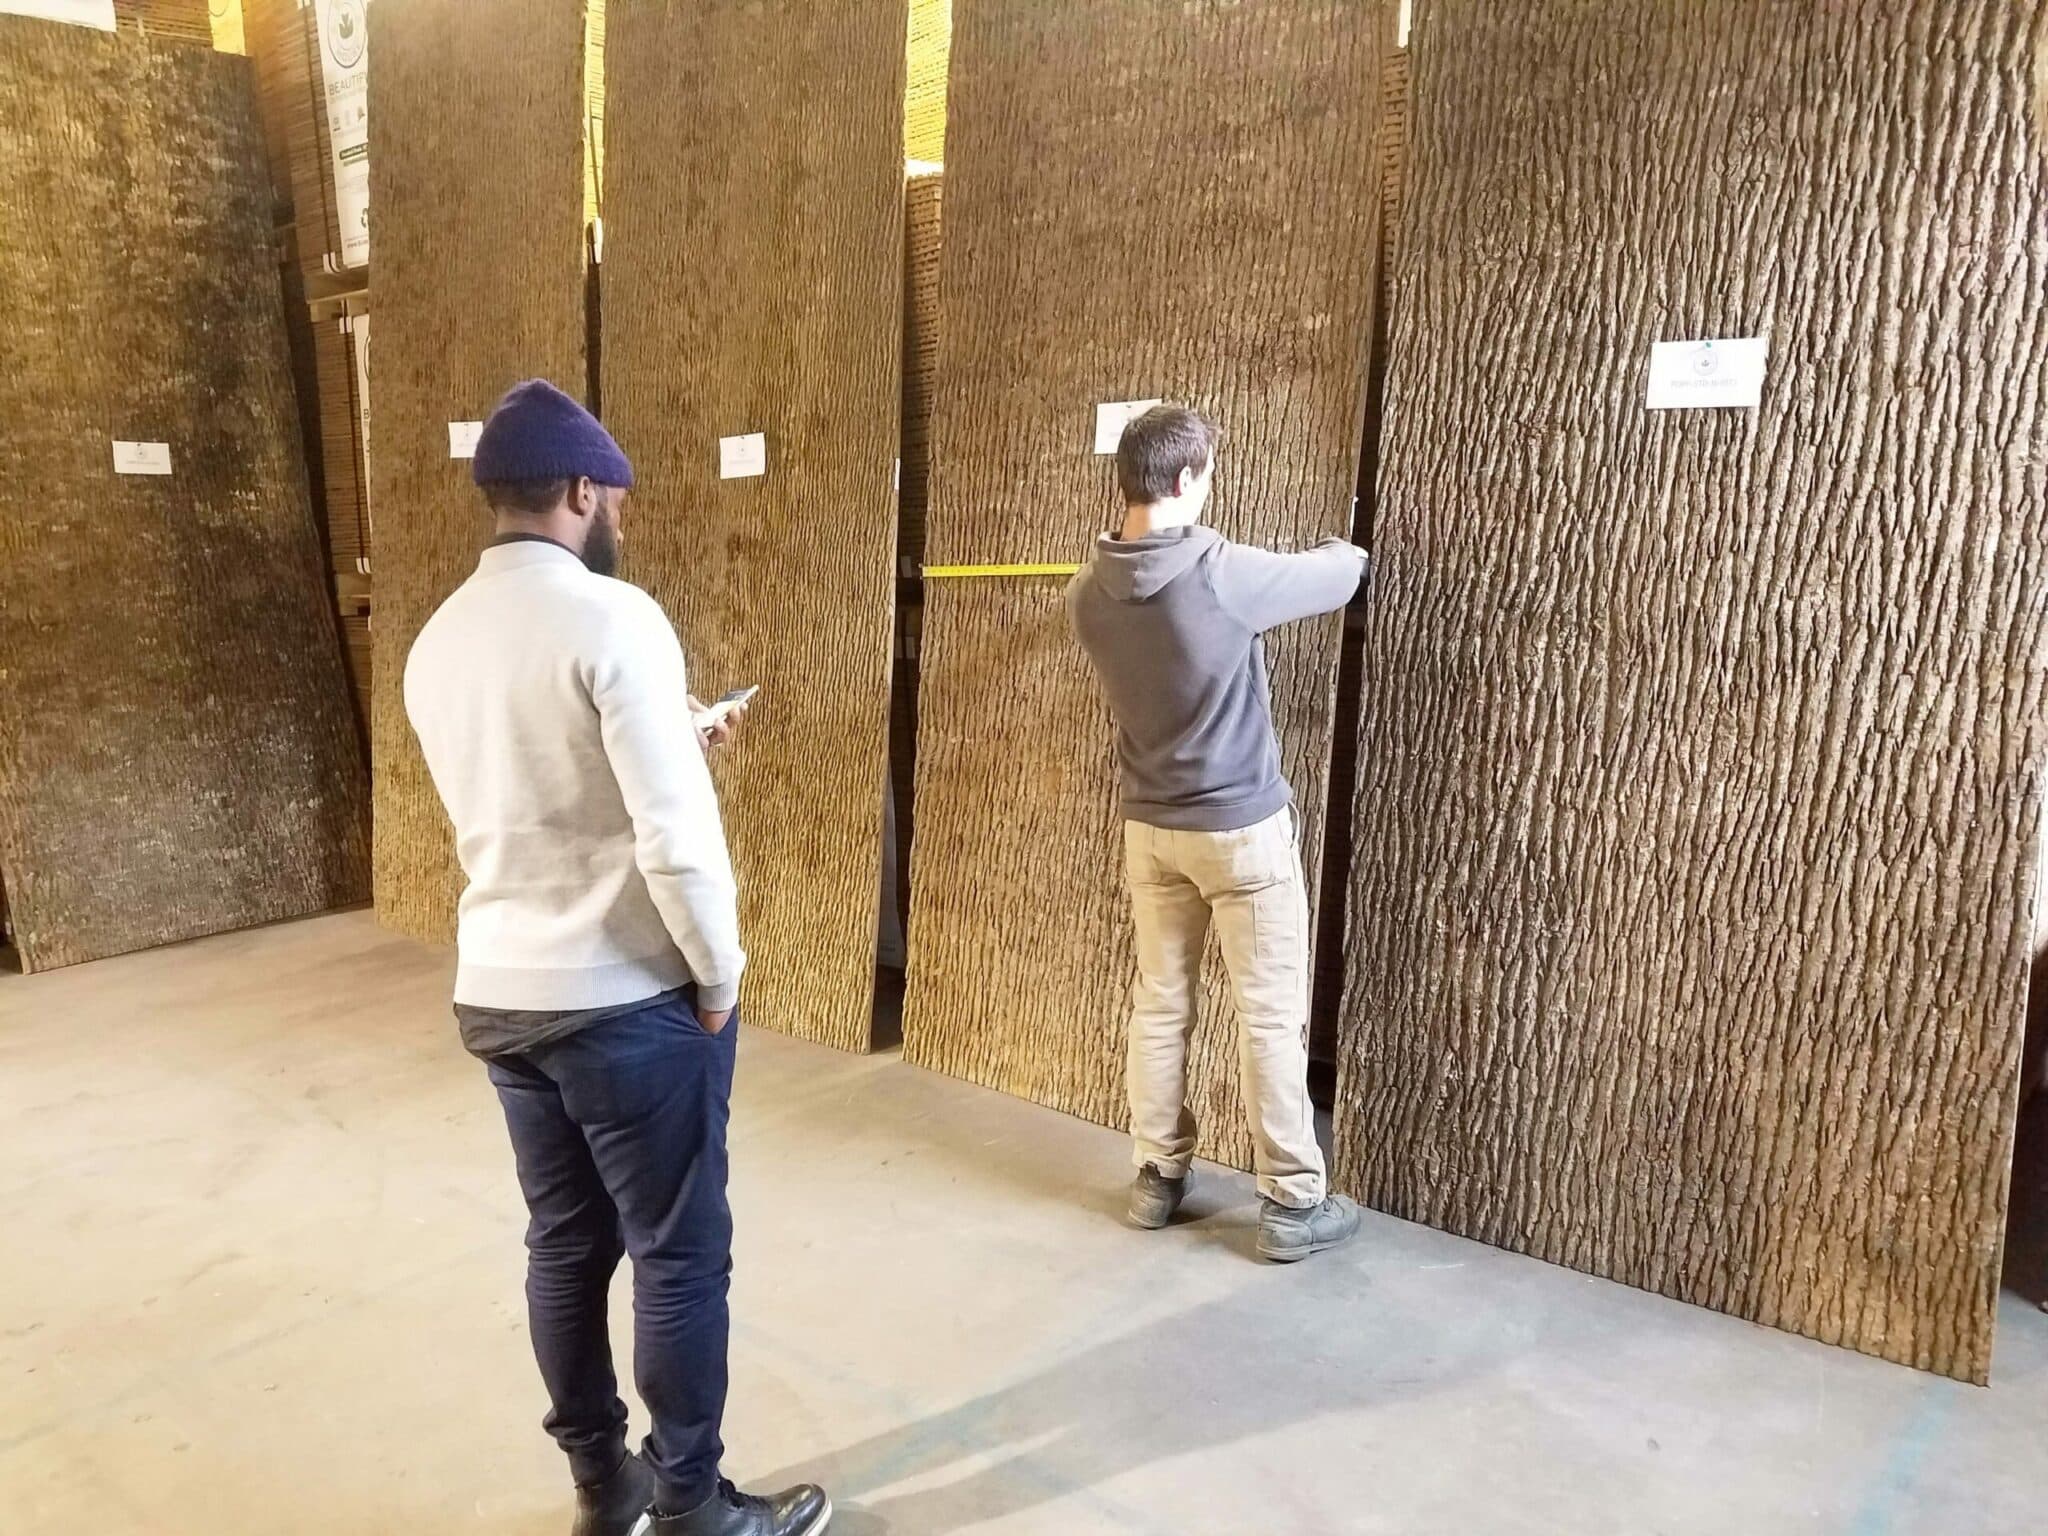 Jonathan Jackson of WSDIA (We Should Do it All) visits Bark House's warehouse to view Poplar Panels for NIKE HQ